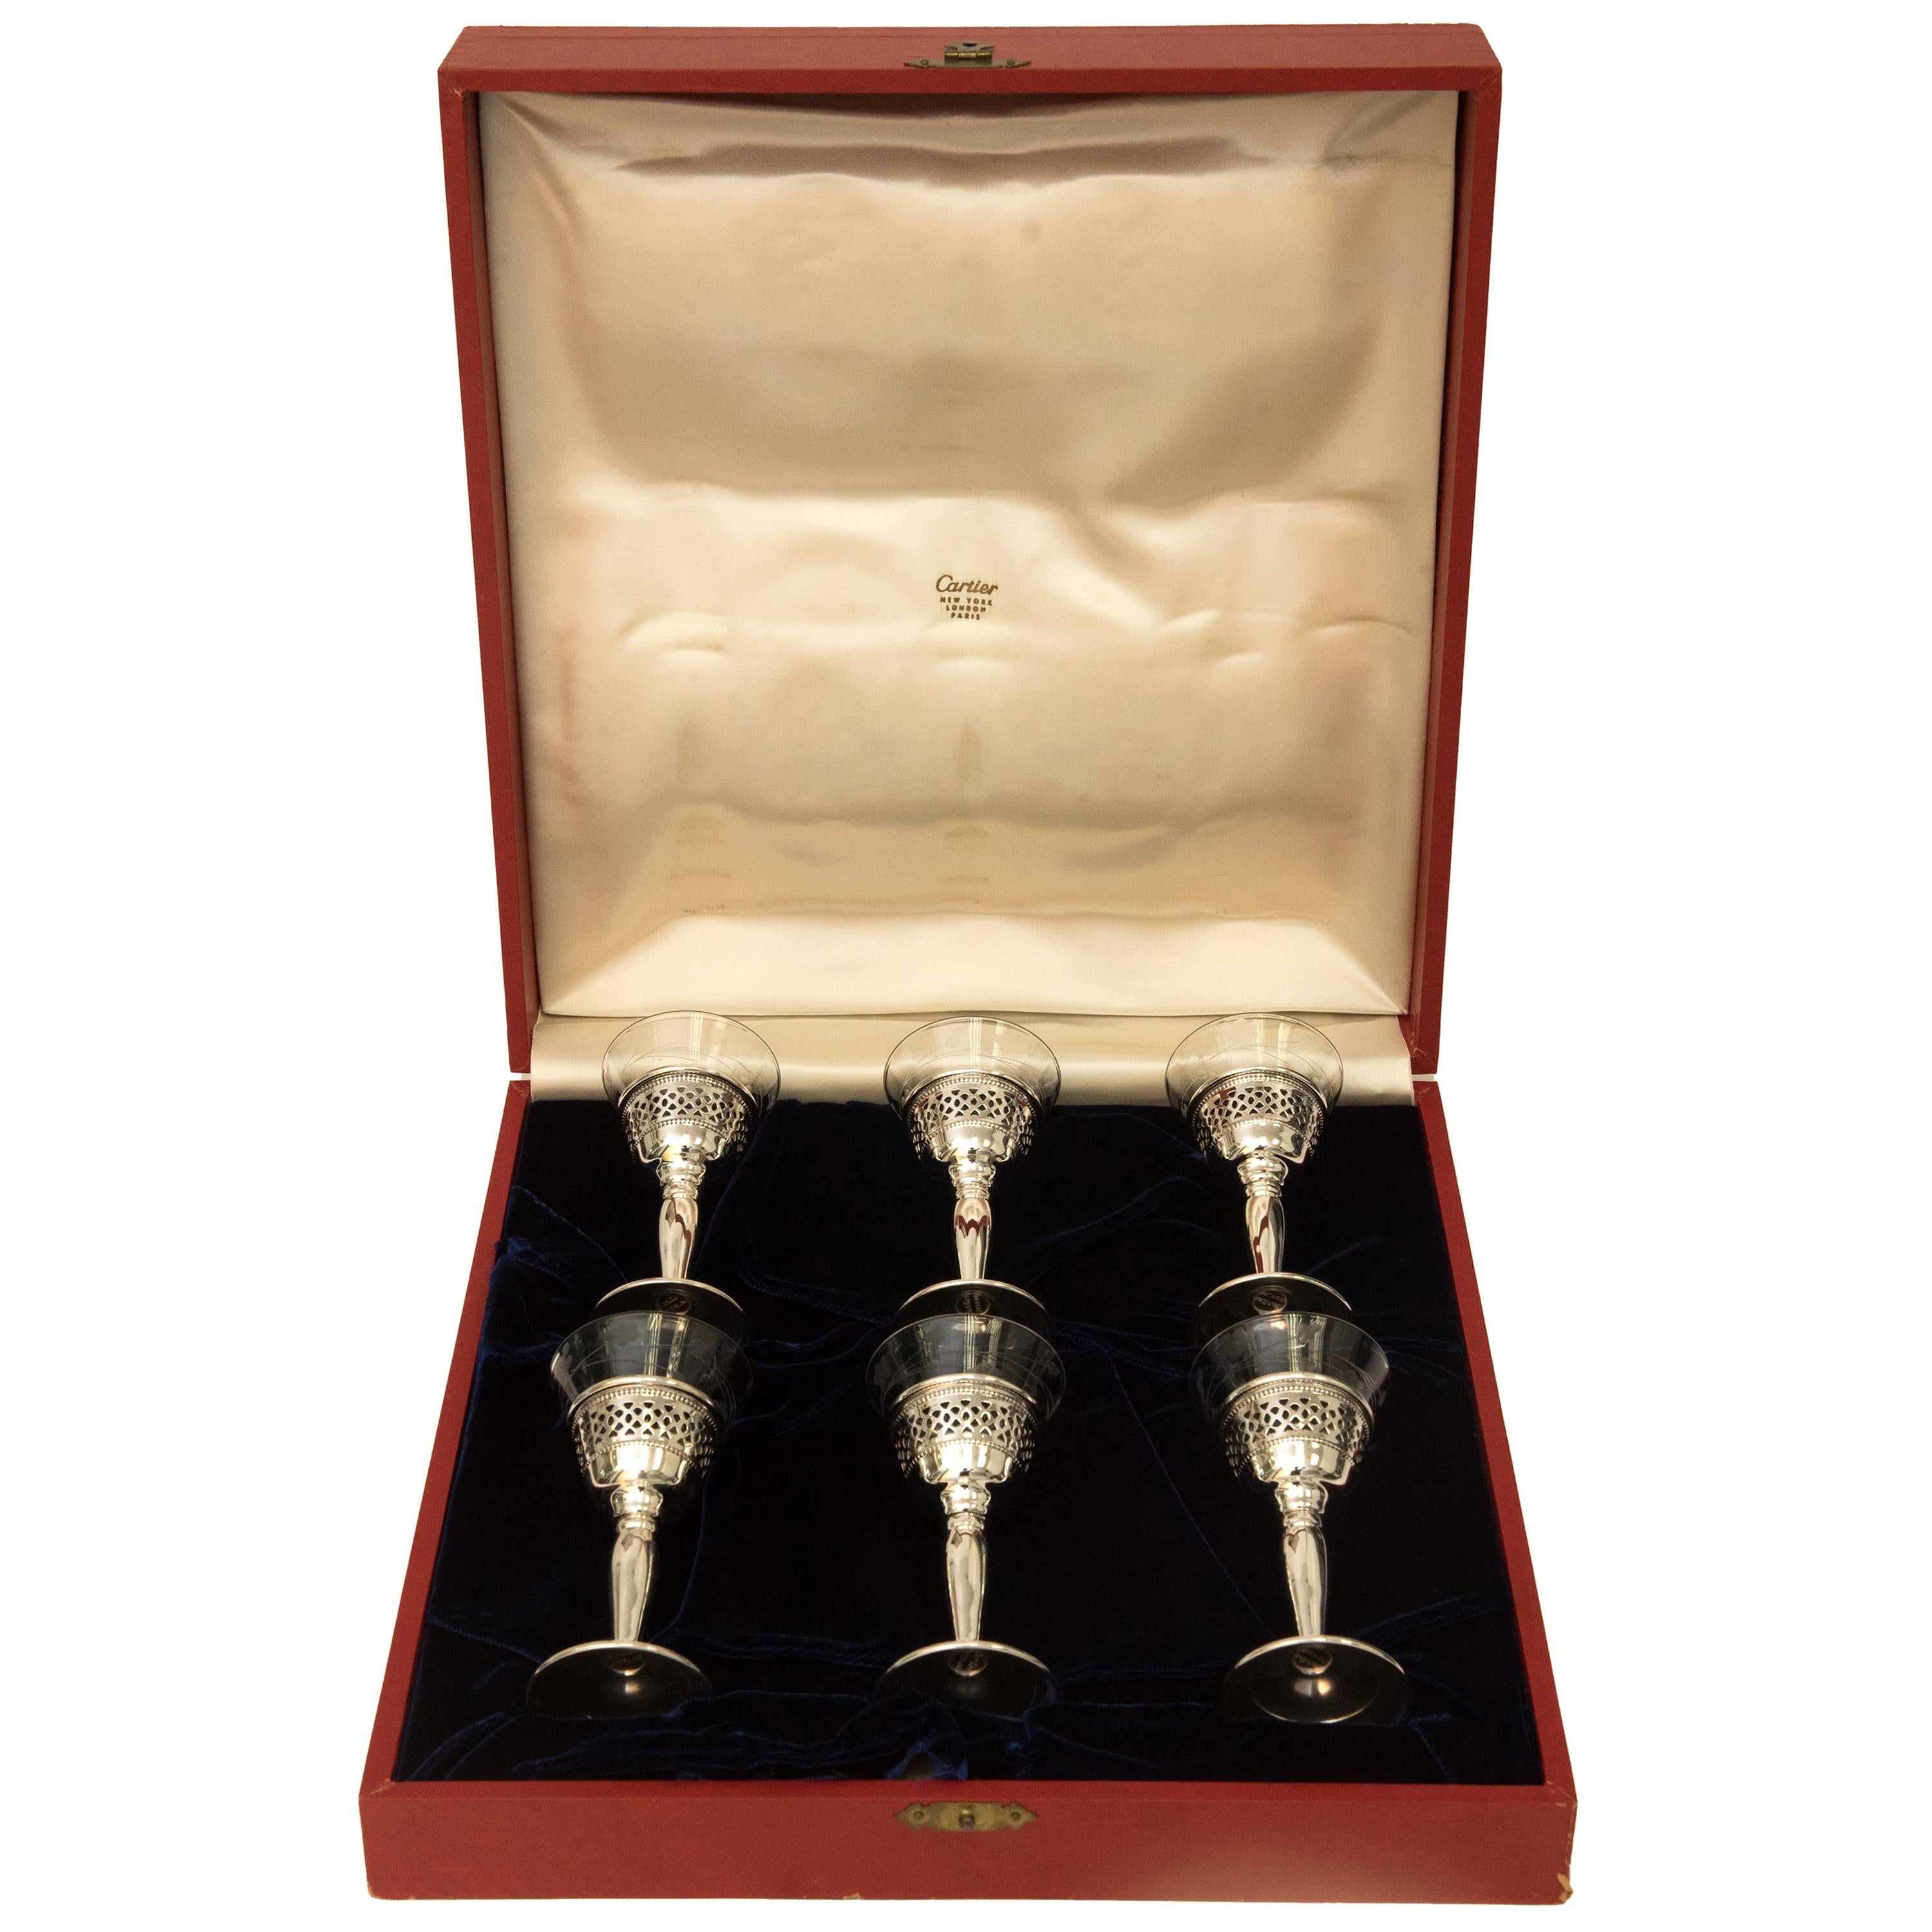 Cartier Full Set of Crystal & Sterling Silver Cordial Glasses with Original Box